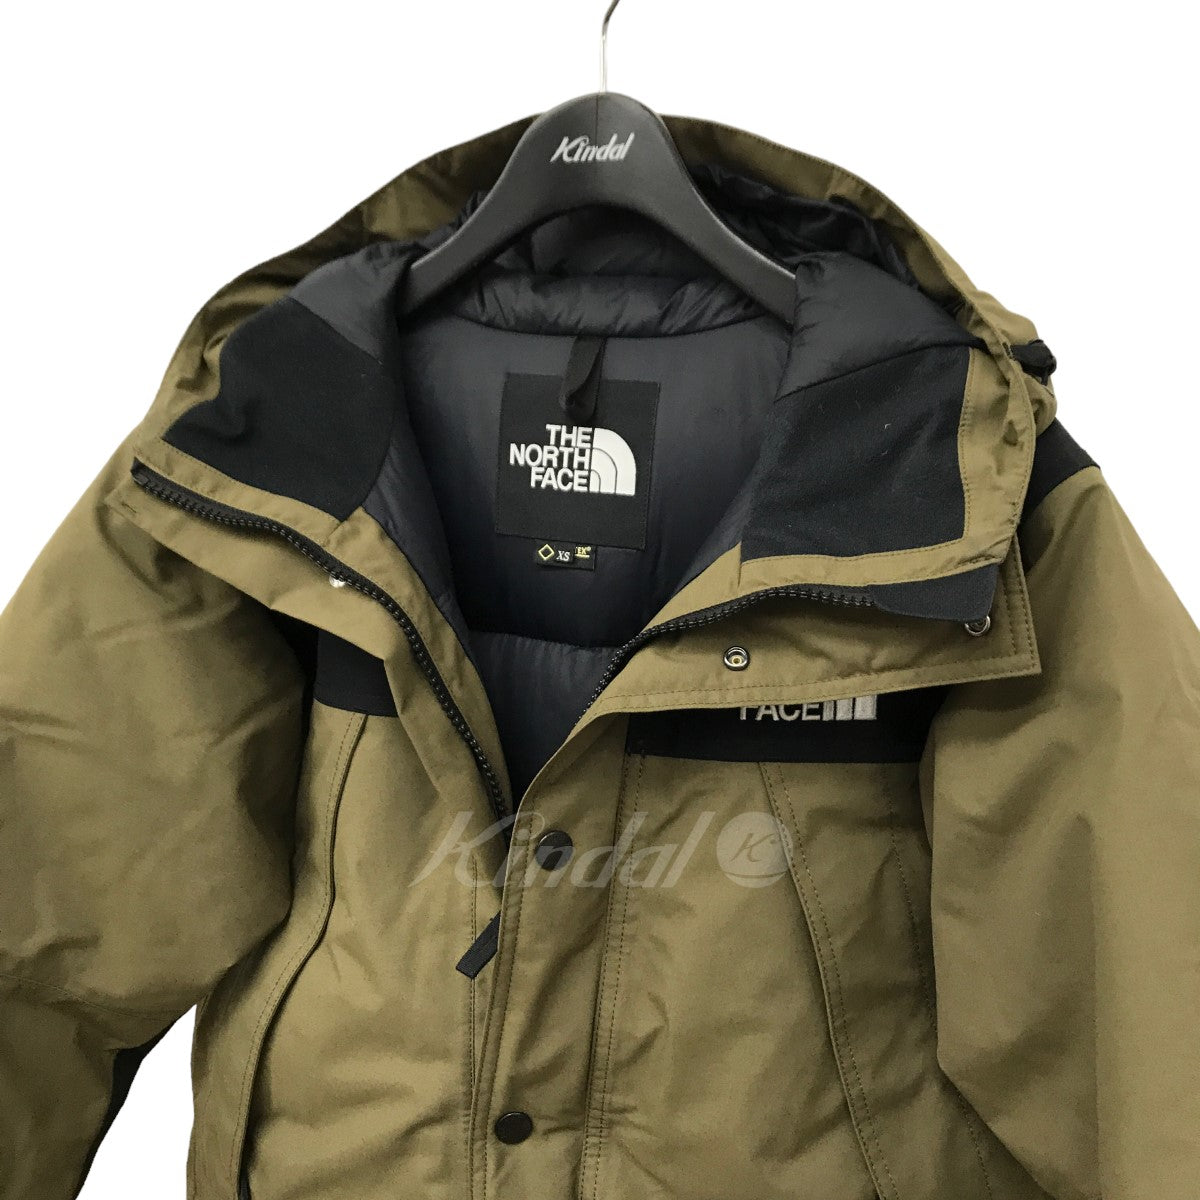 THE NORTH FACE(ザノースフェイス) Mountain Down Jacket マウンテン ...